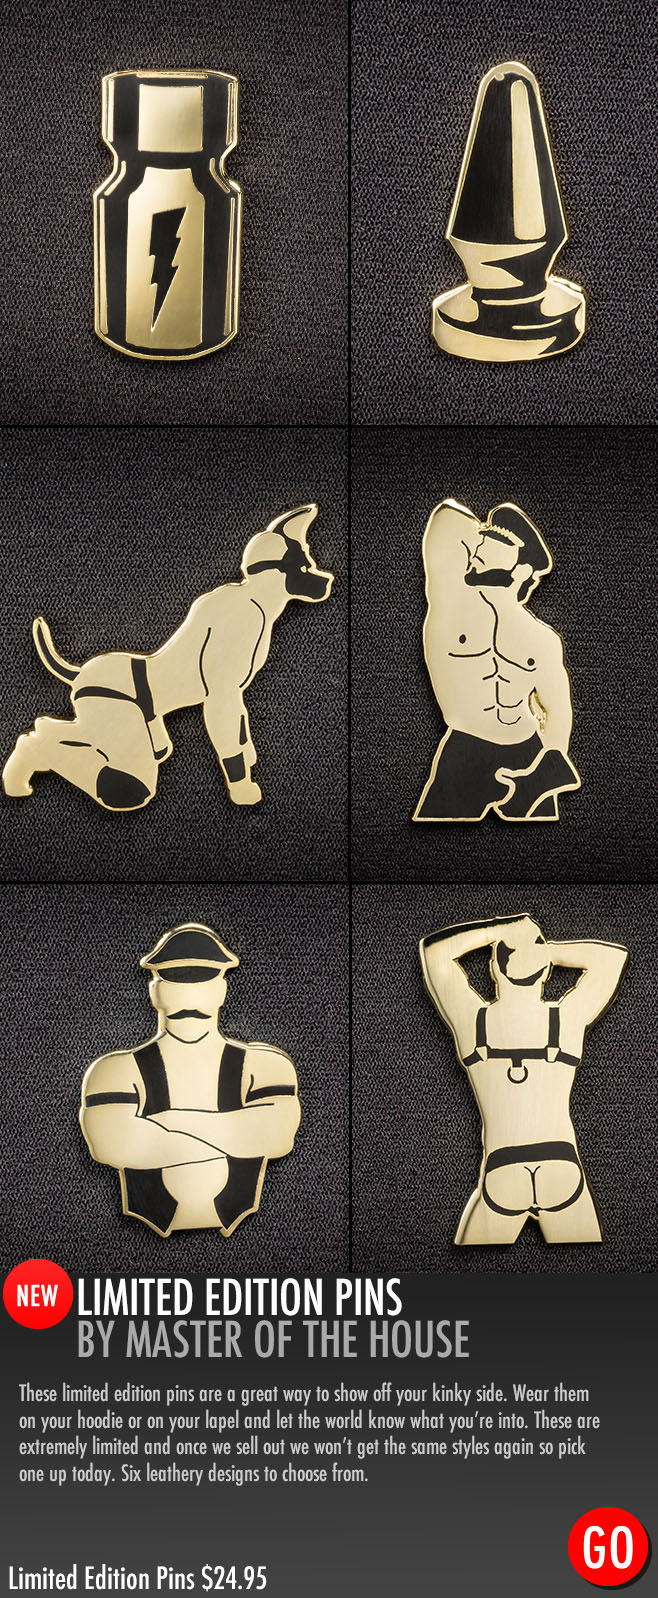 Master of the House kink pins